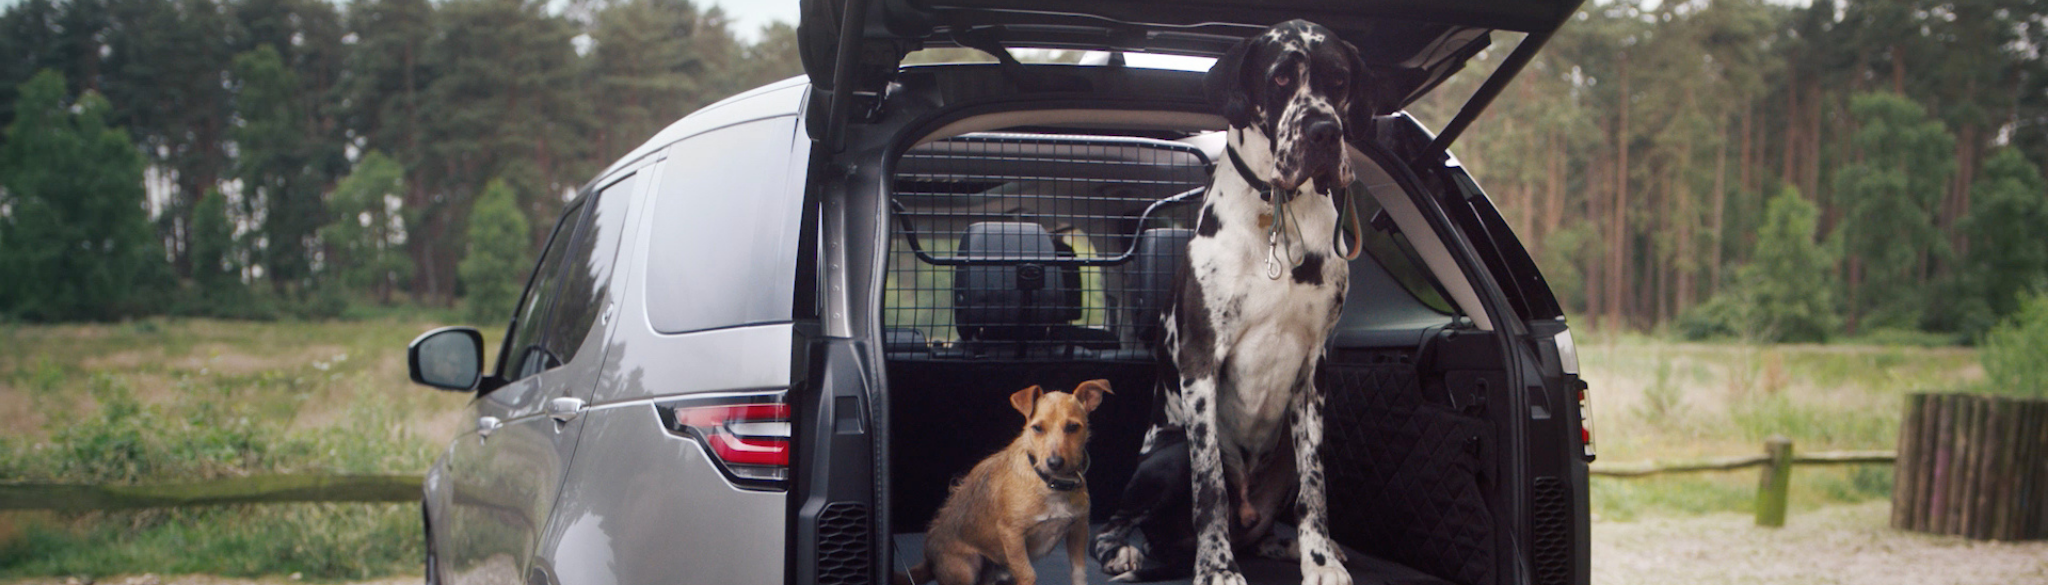 Land Rover Dog Owners